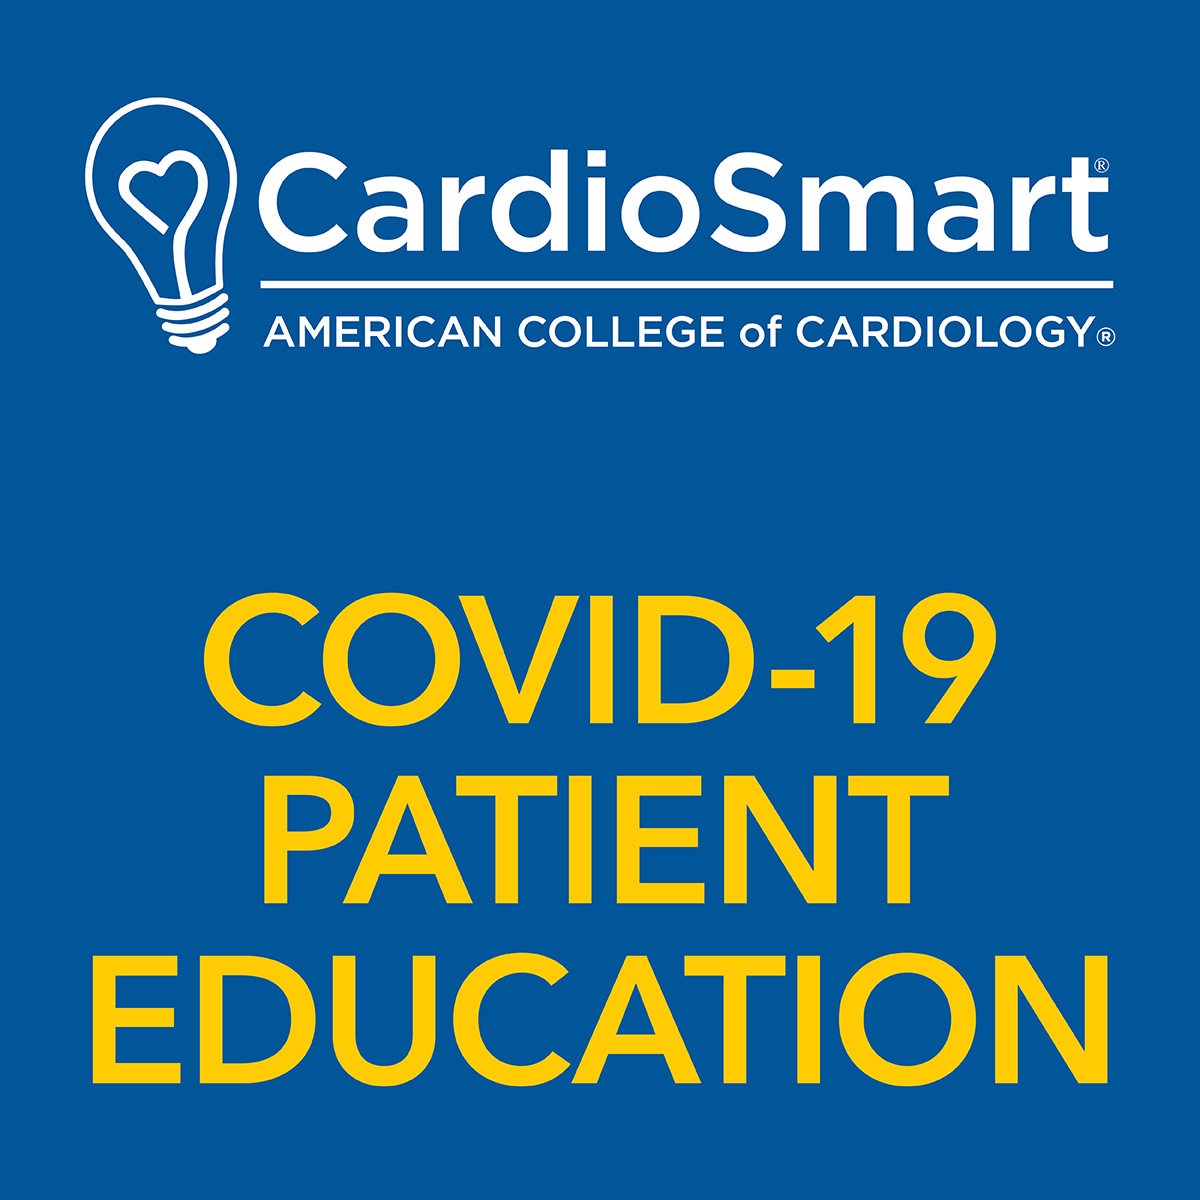 Click here to visit CardioSmart's COVID-19 Hub.